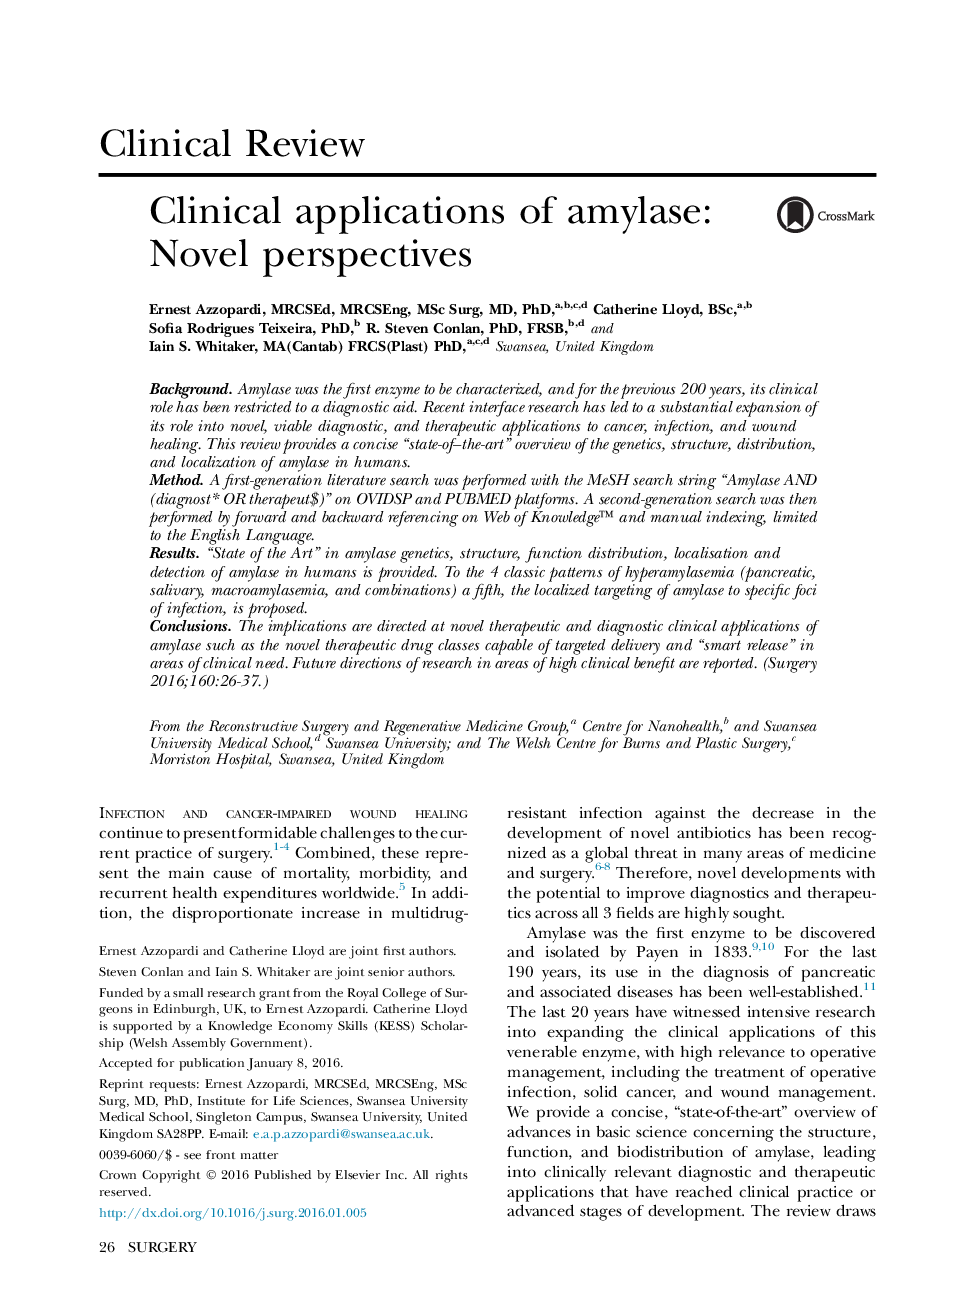 Clinical ReviewClinical applications of amylase: Novel perspectives